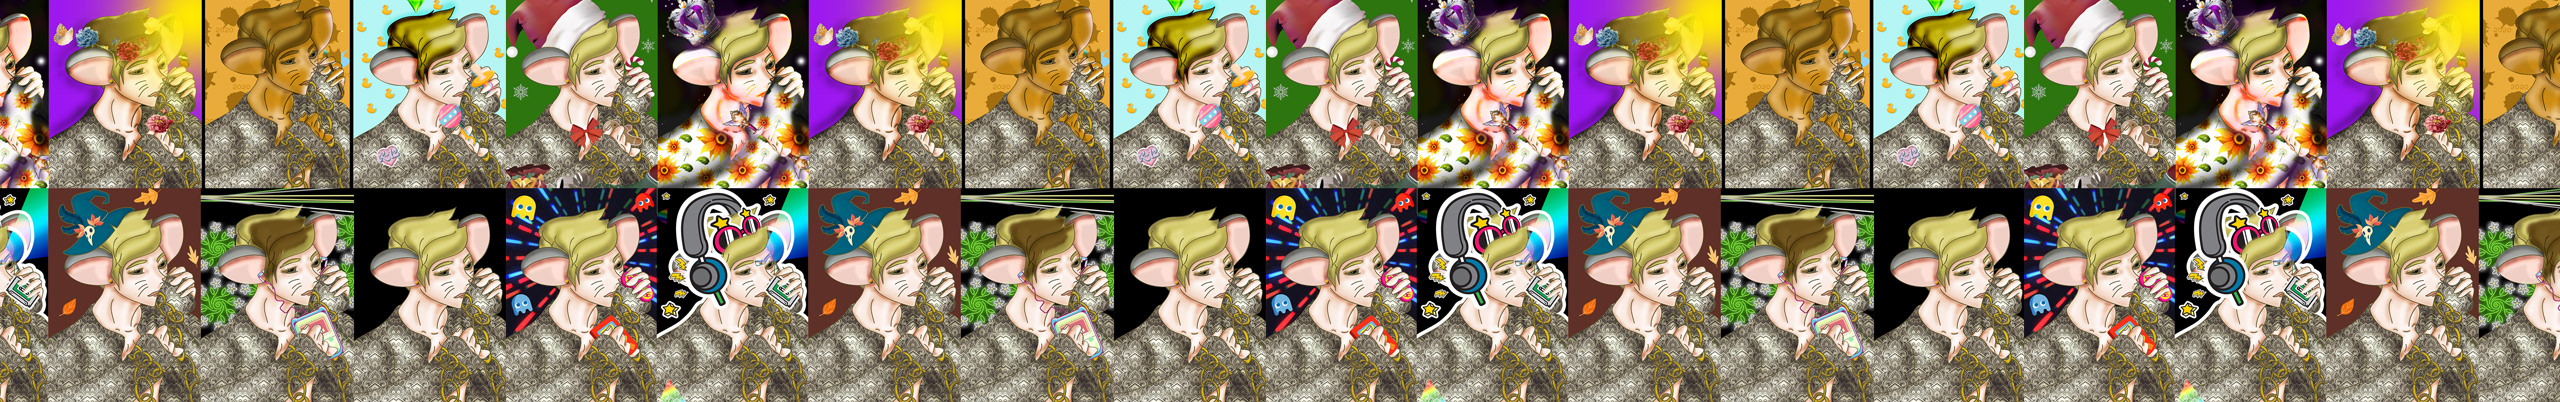 Yellow mouse's profile banner